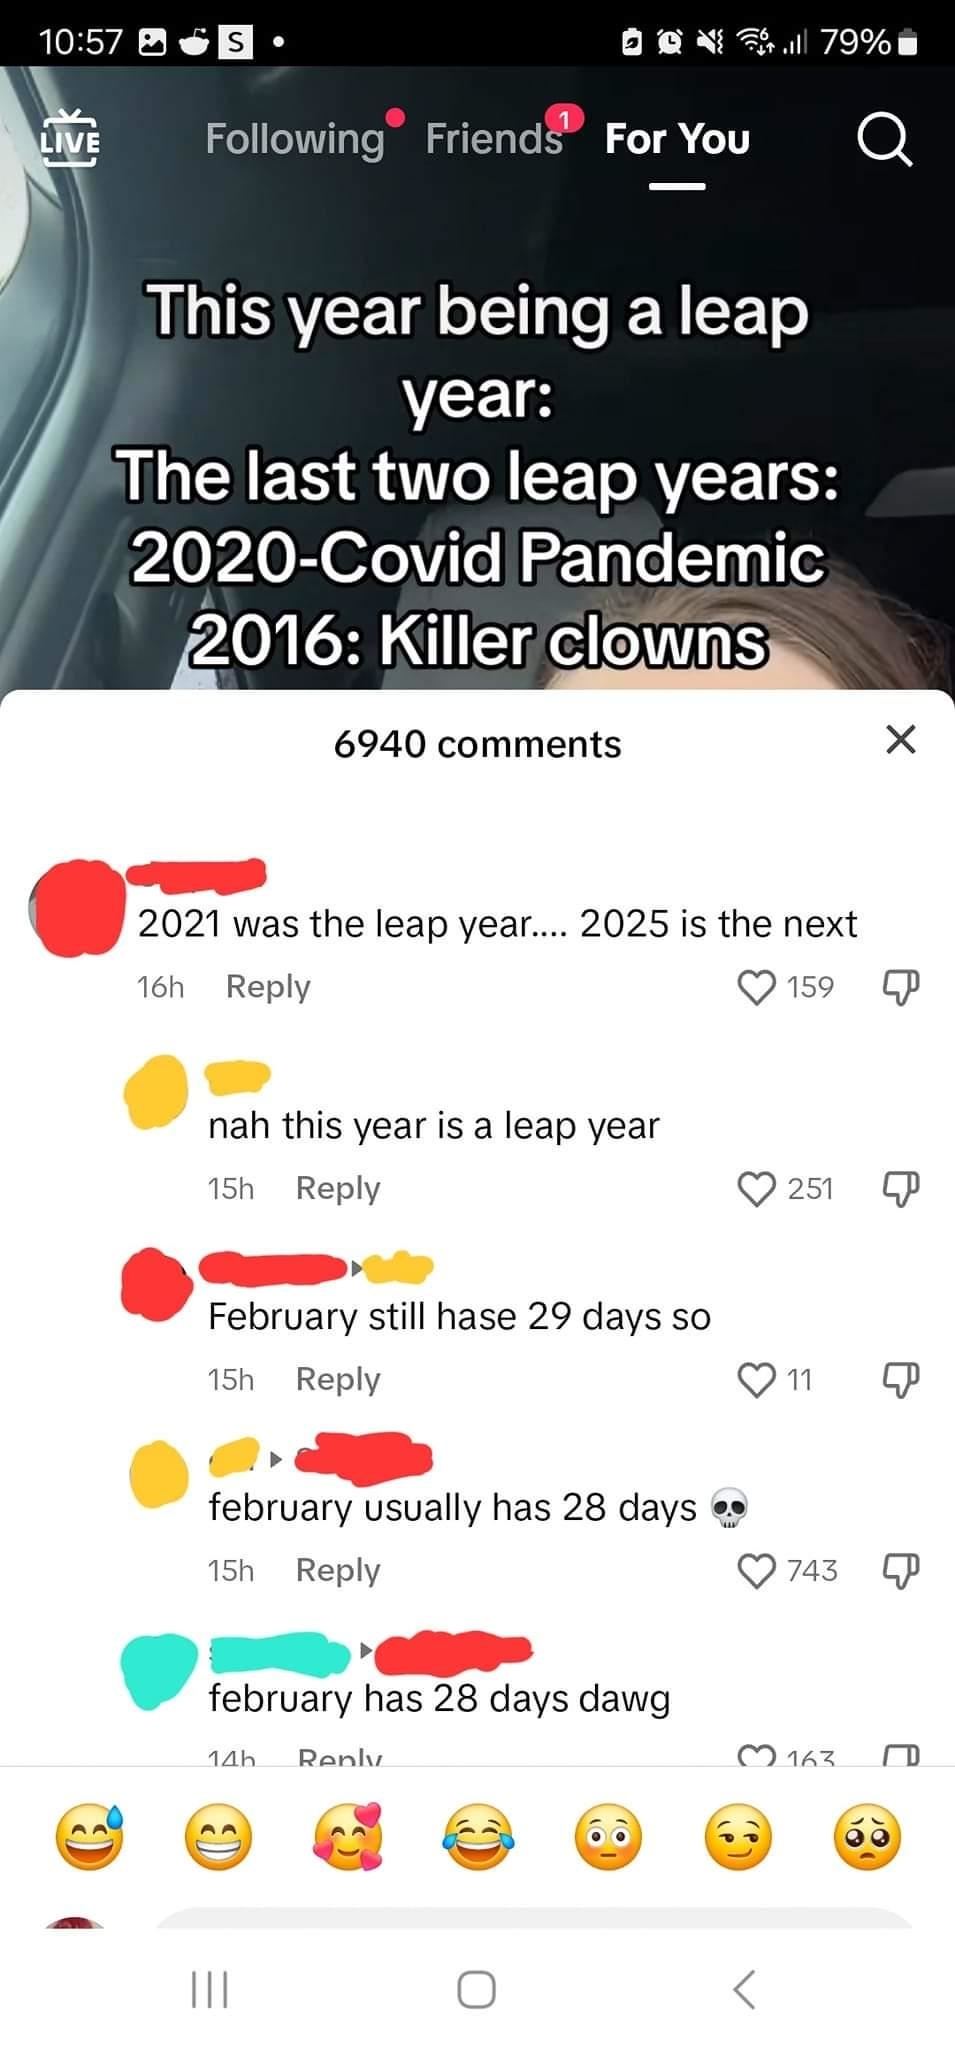 Person thinks 2021 was a leap year and 2025 is the next one because they say February 2024 has 28 days